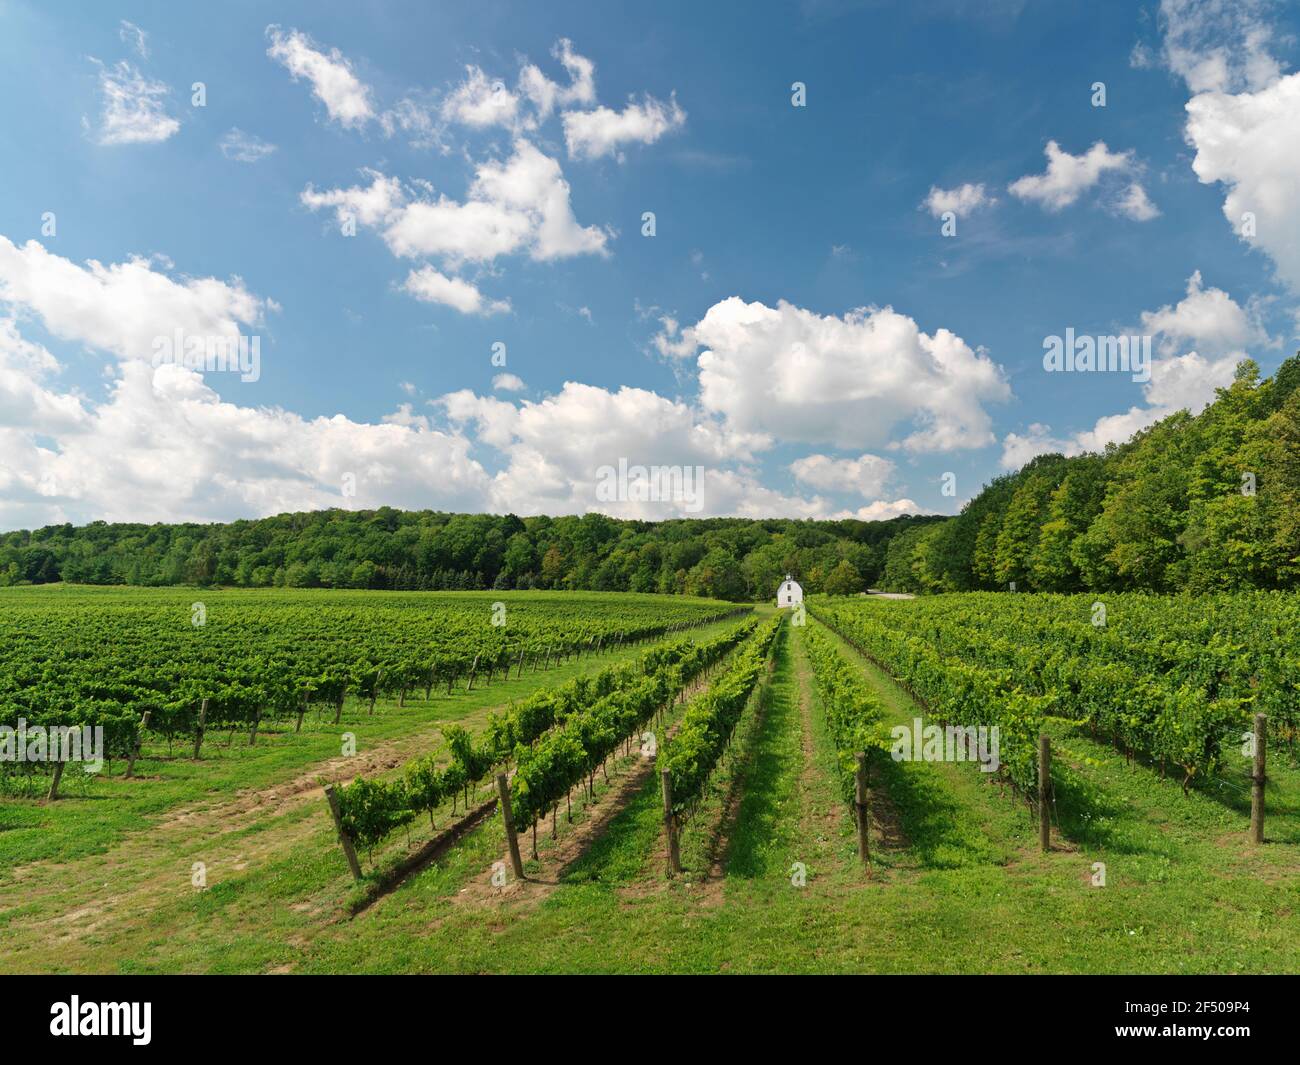 Canada, Ontario, Beamsville, rows of grape vines with a white painted barn. Stock Photo